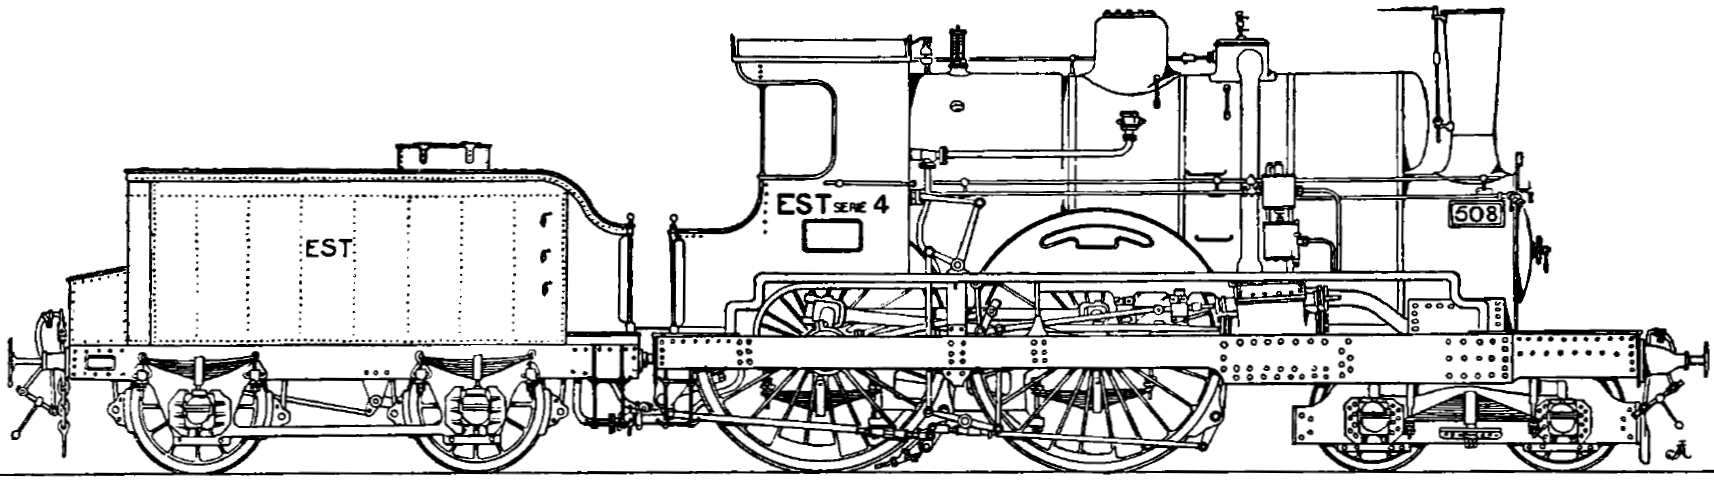 No. 508 with 4-4-0 wheel arrangement and Flaman boiler